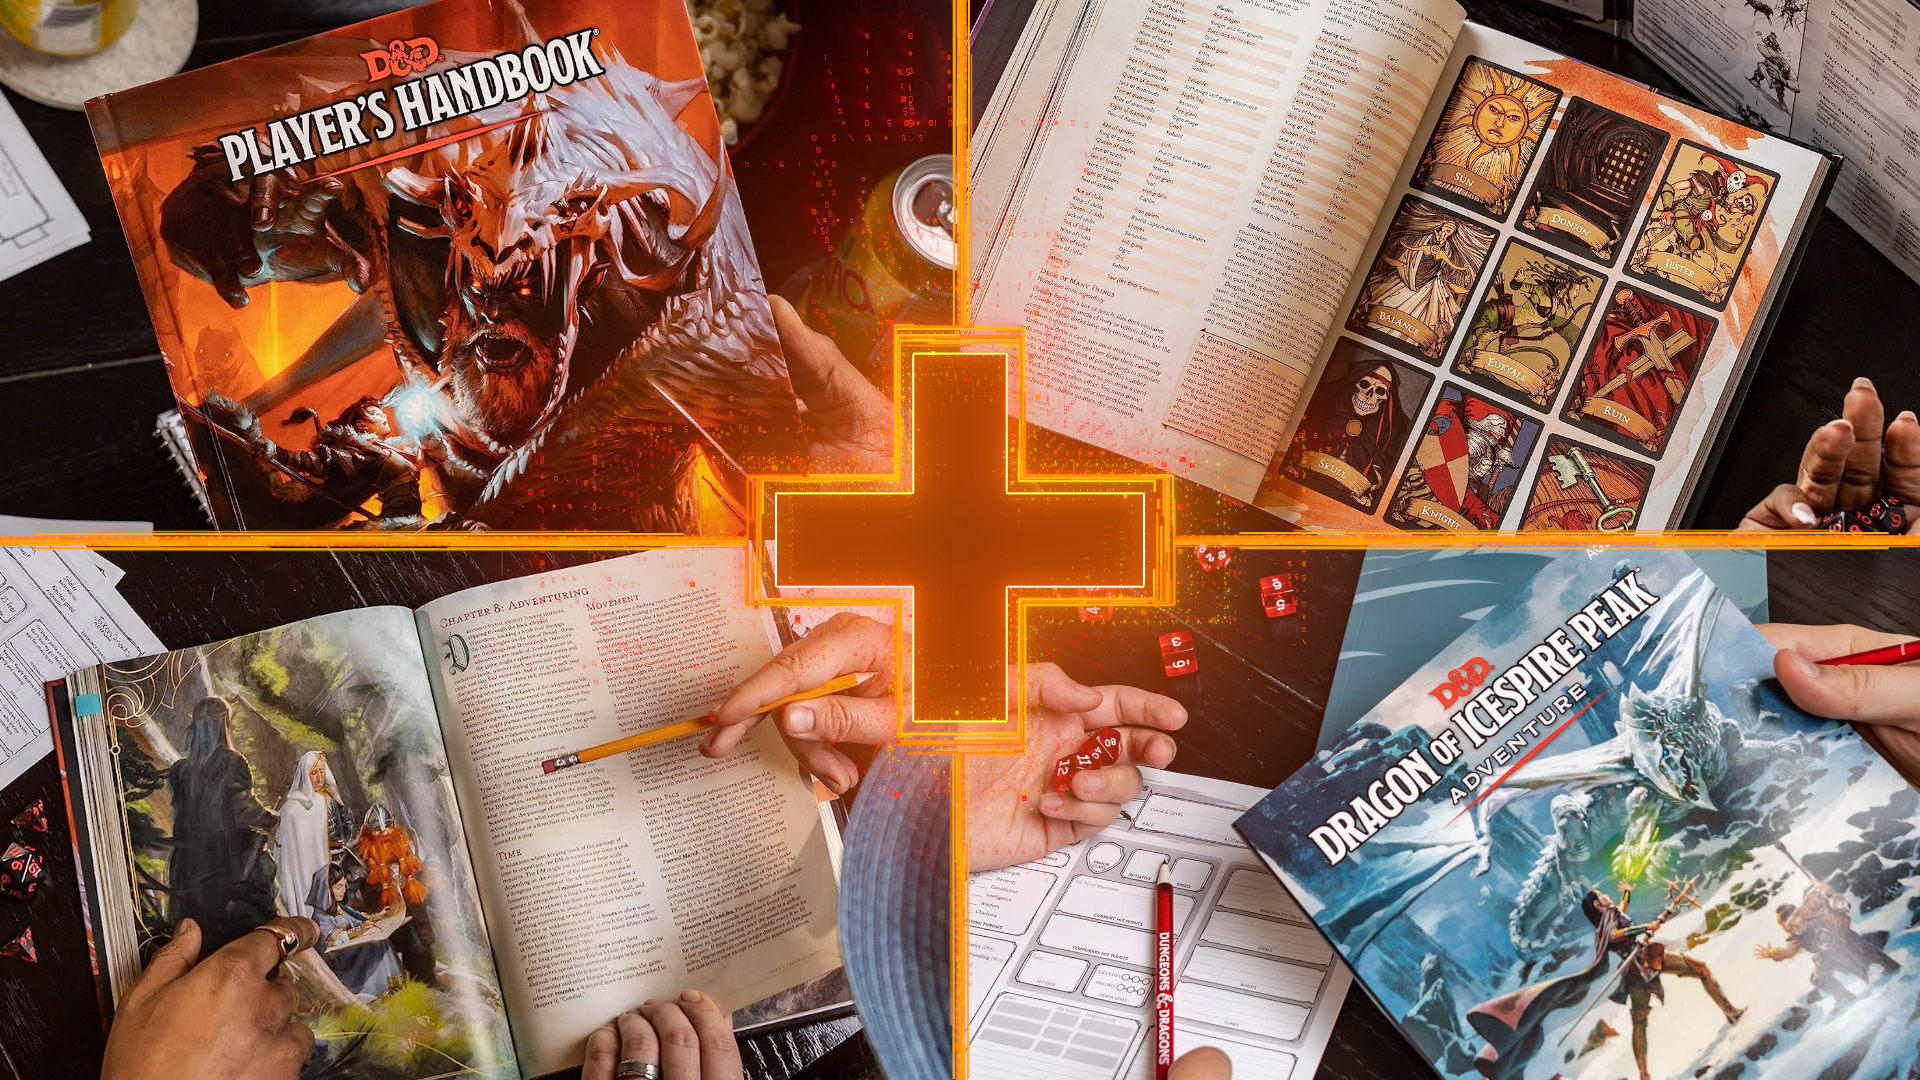 Best Dungeons & Dragons Campaigns Of All Time